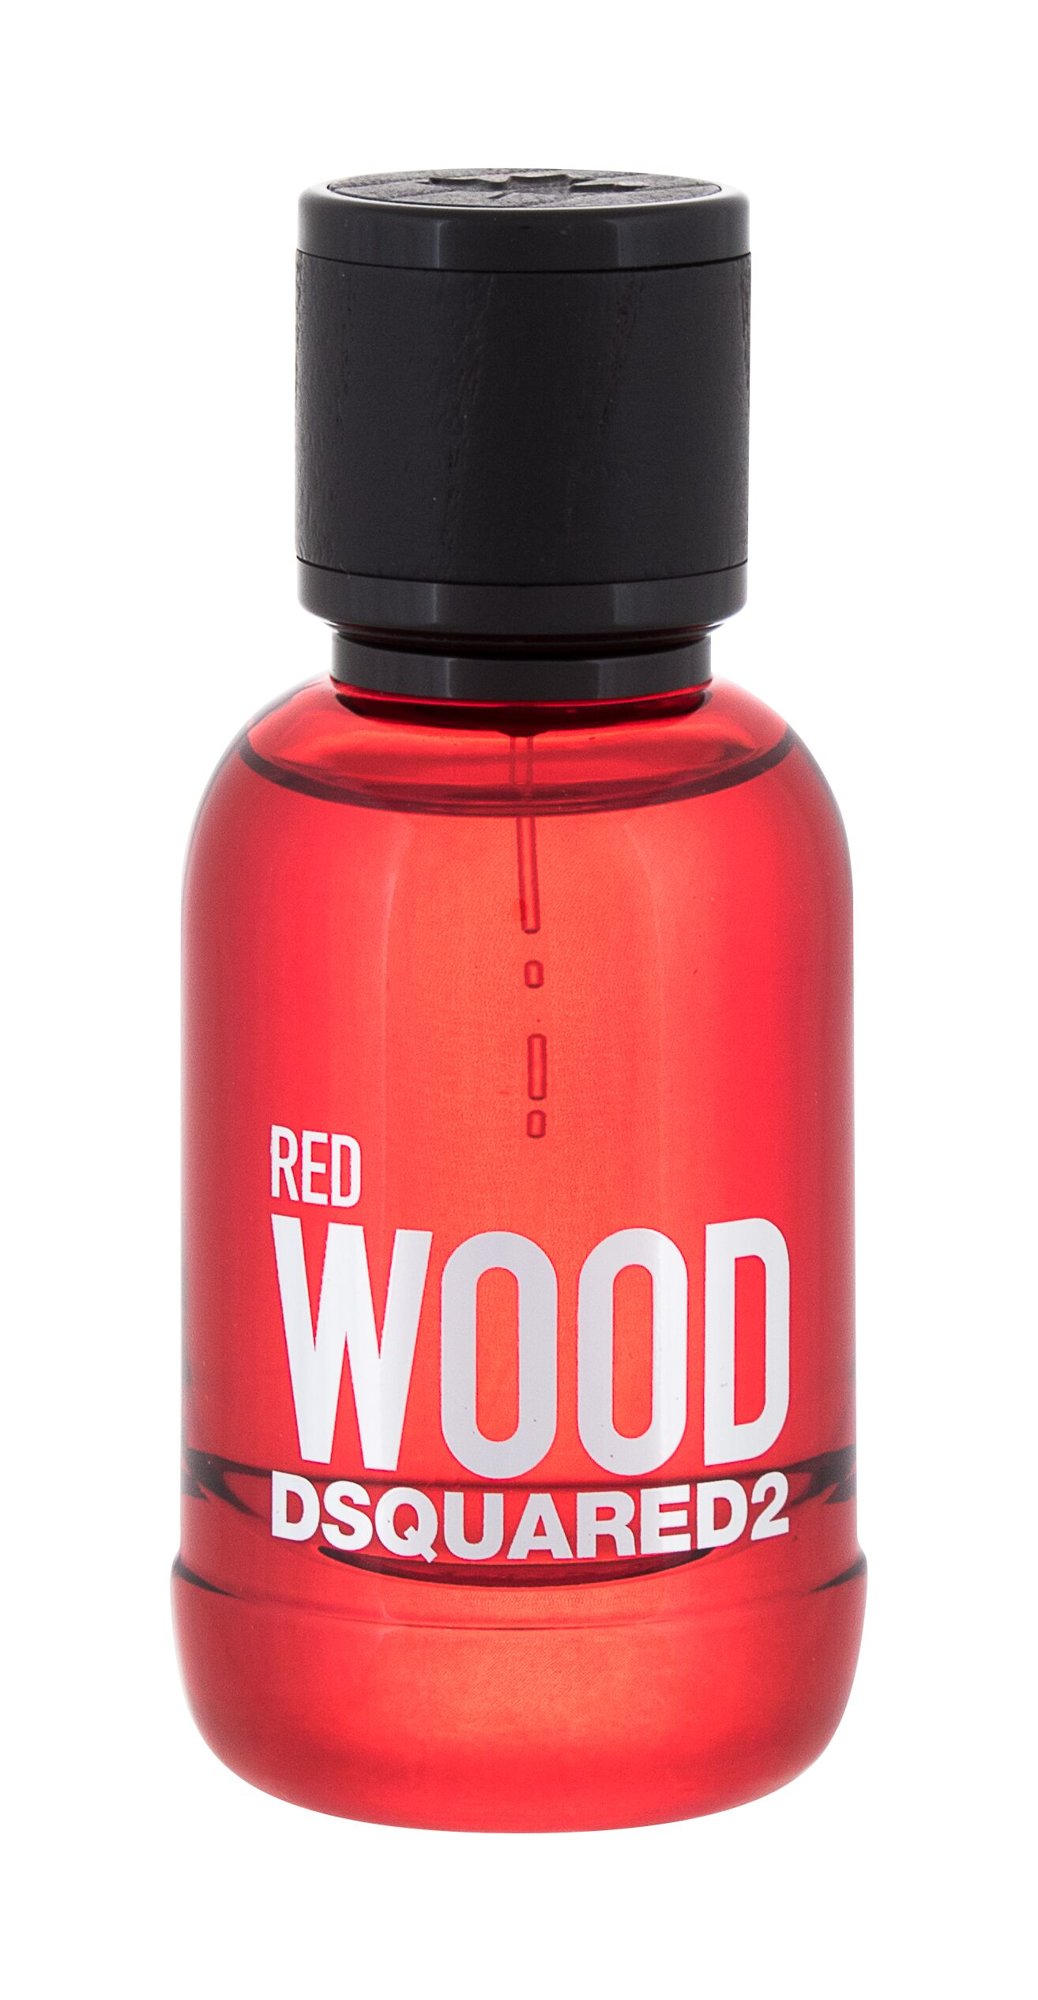 Dsquared2 Red Wood, edt 5ml